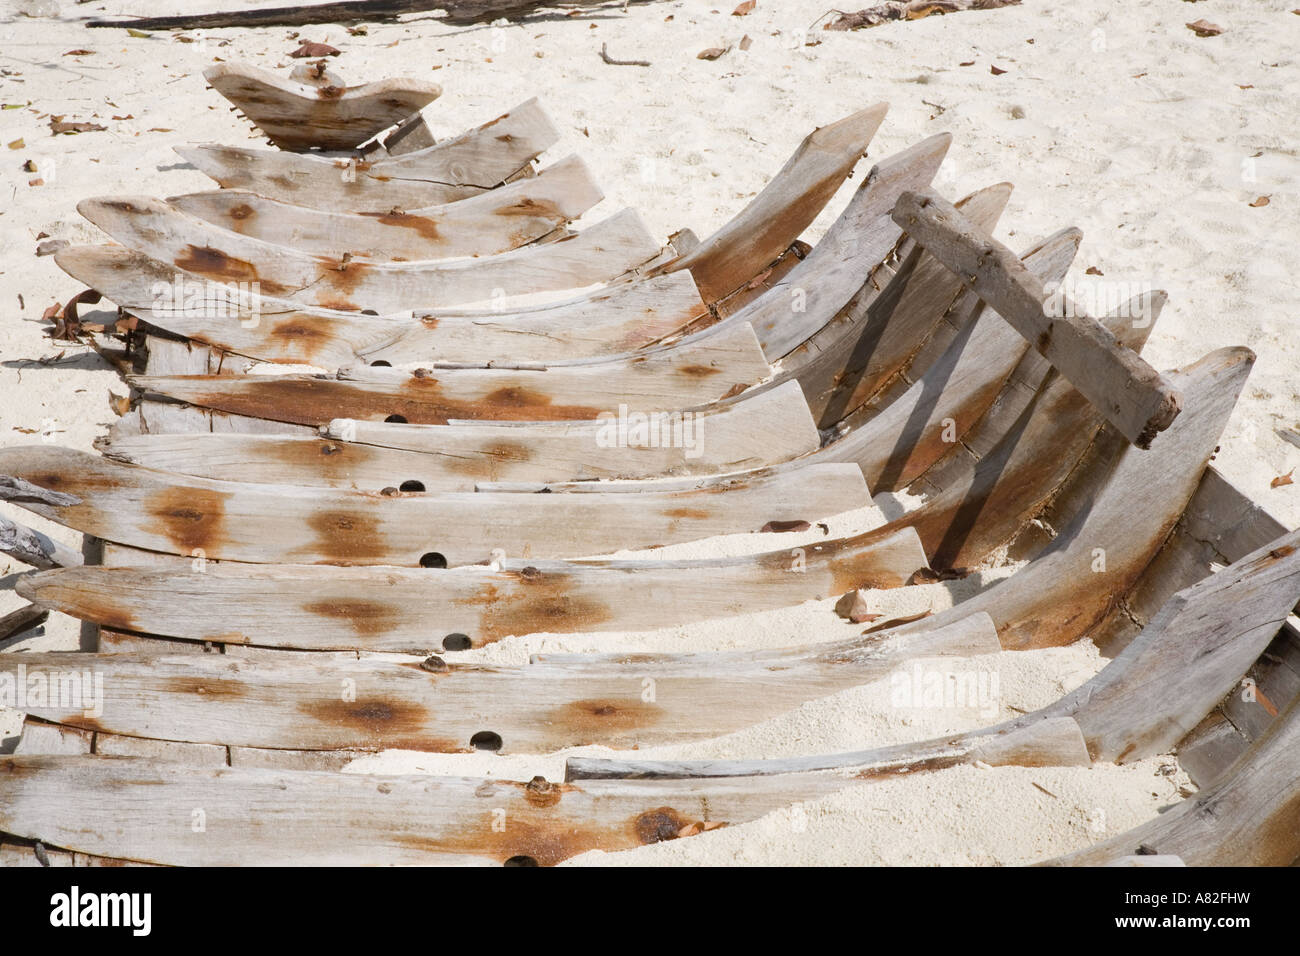 Wrecked wooden long tail boat thailand buried keel, hull curvatures on Koh Mai Phai is also called Bamboo Island Krabi Province Andaman Sea Thailand Stock Photo